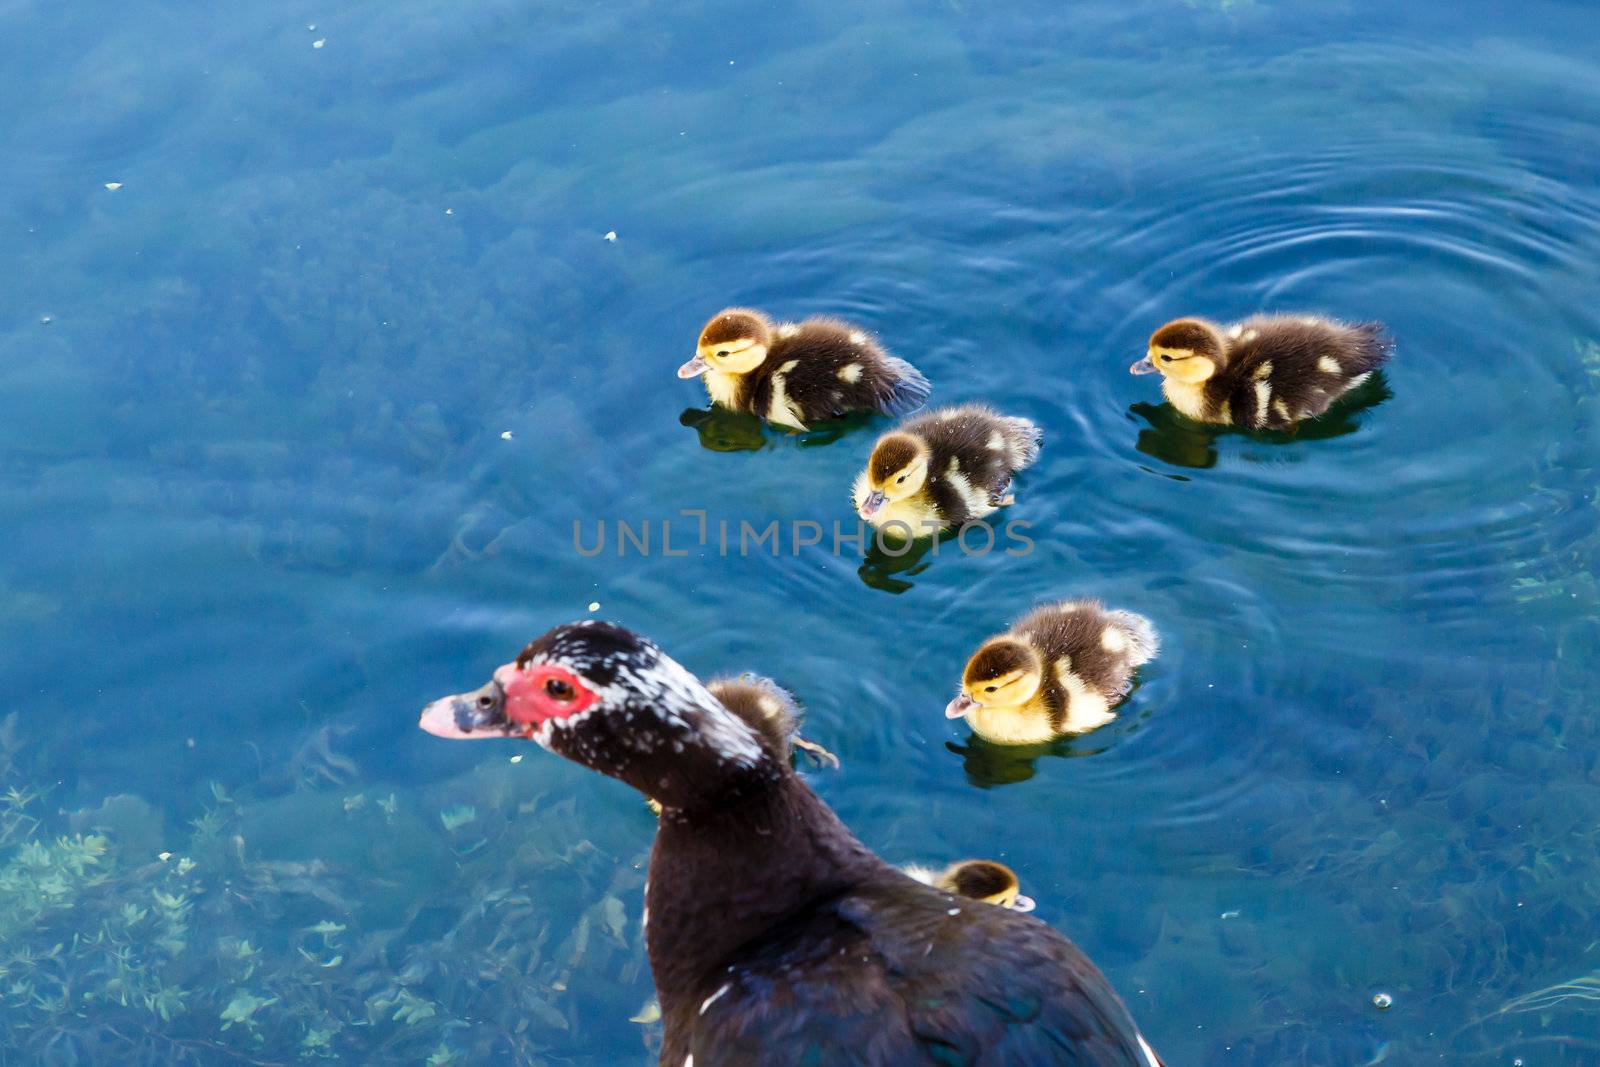 Duck and Baby Ducklings in the Water, Split, Croatia by anshar